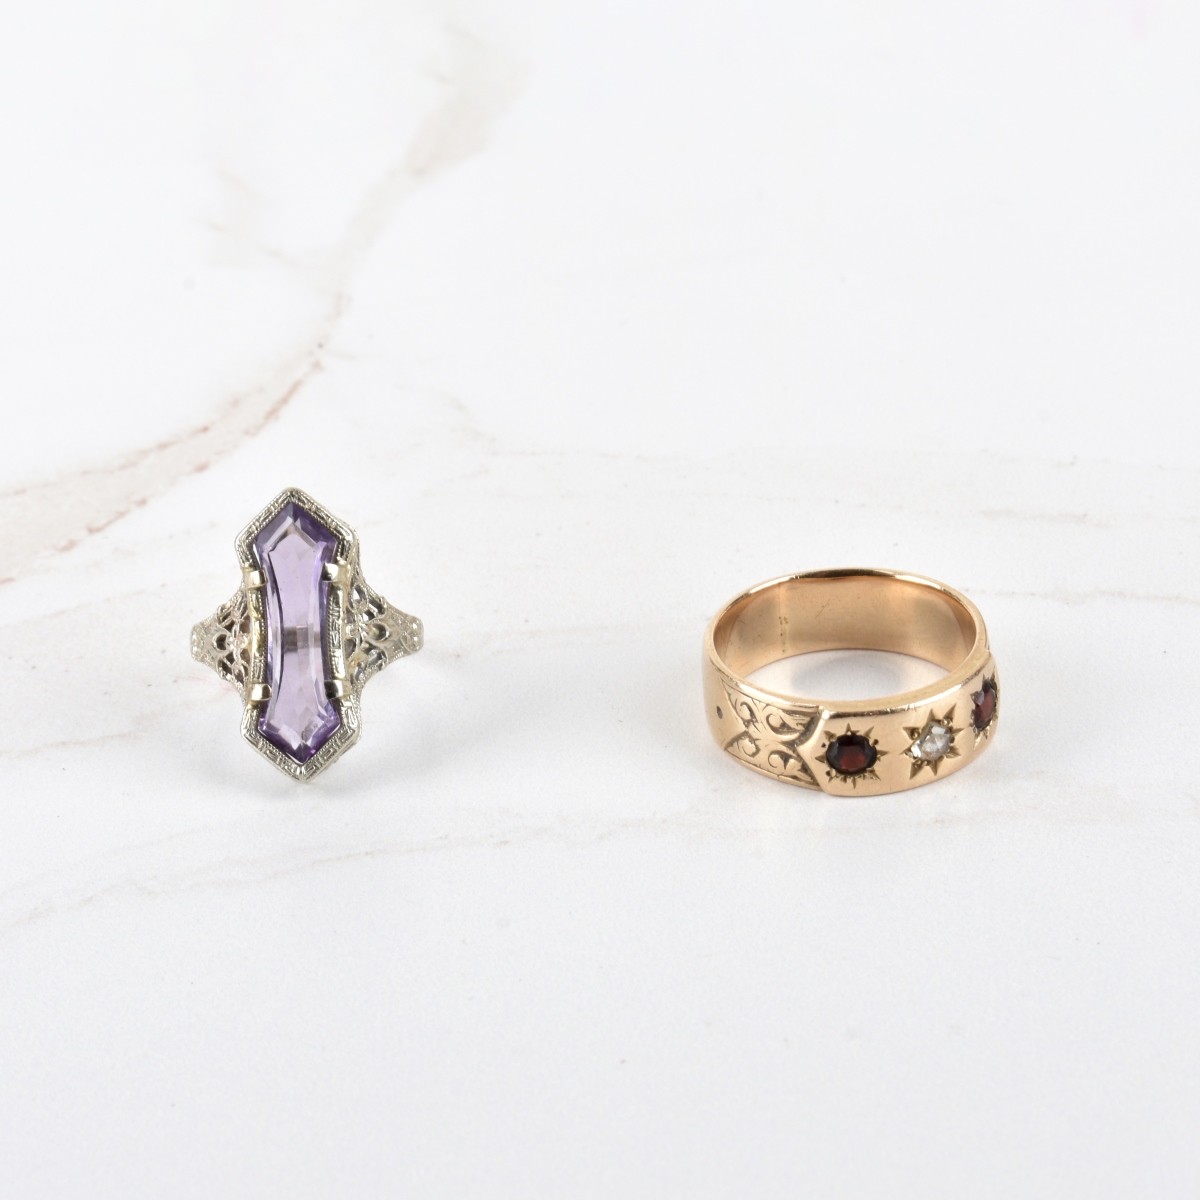 Two Antique 14K and Gemstone Rings